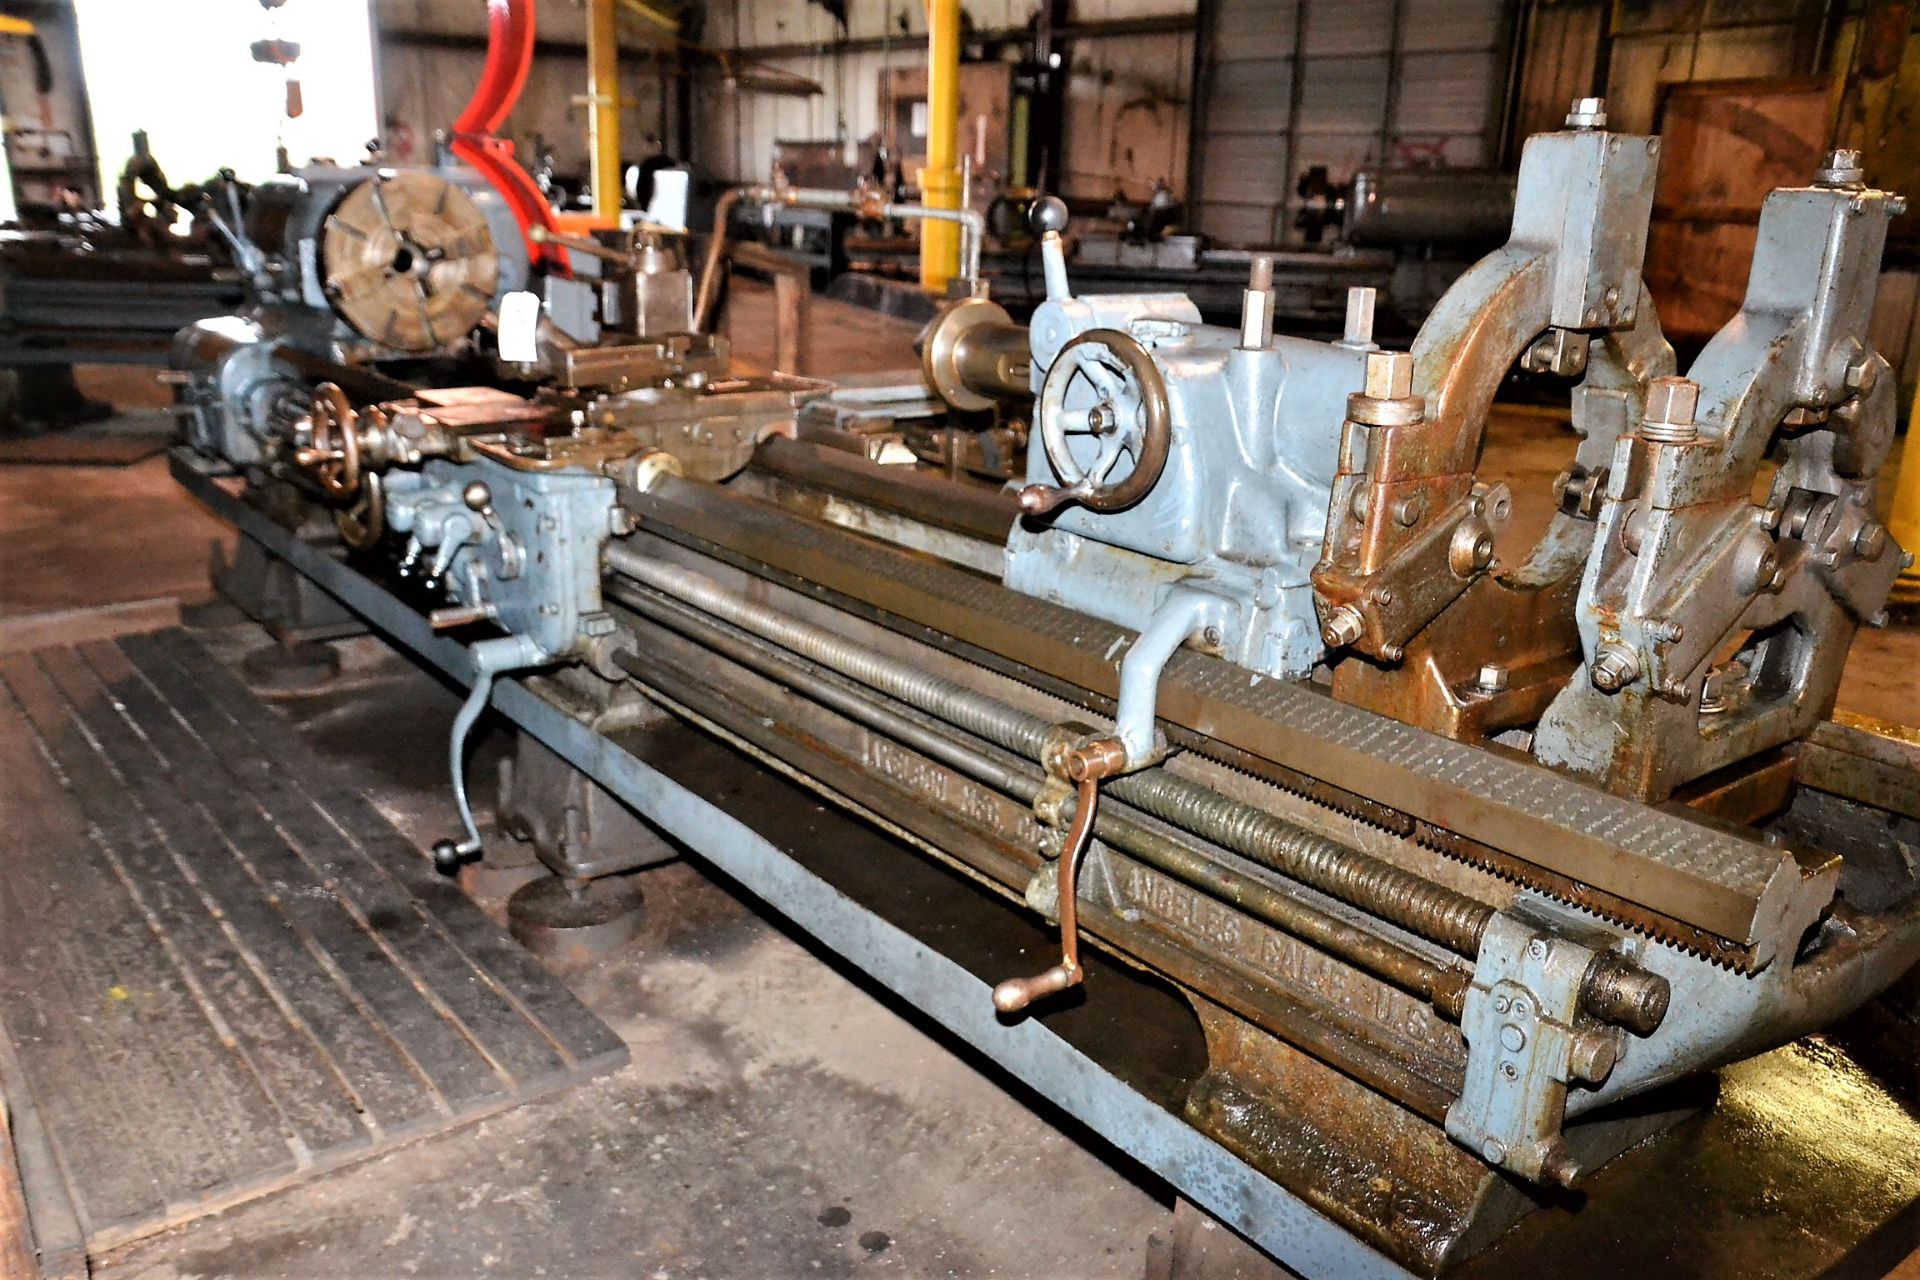 ENGINE LATHE, AXELSON, 20” X 120”, WITH 18" 4 JAW CHUCK, TAPER ATTACHMENT, TAILSTOCK, (2) STEADY